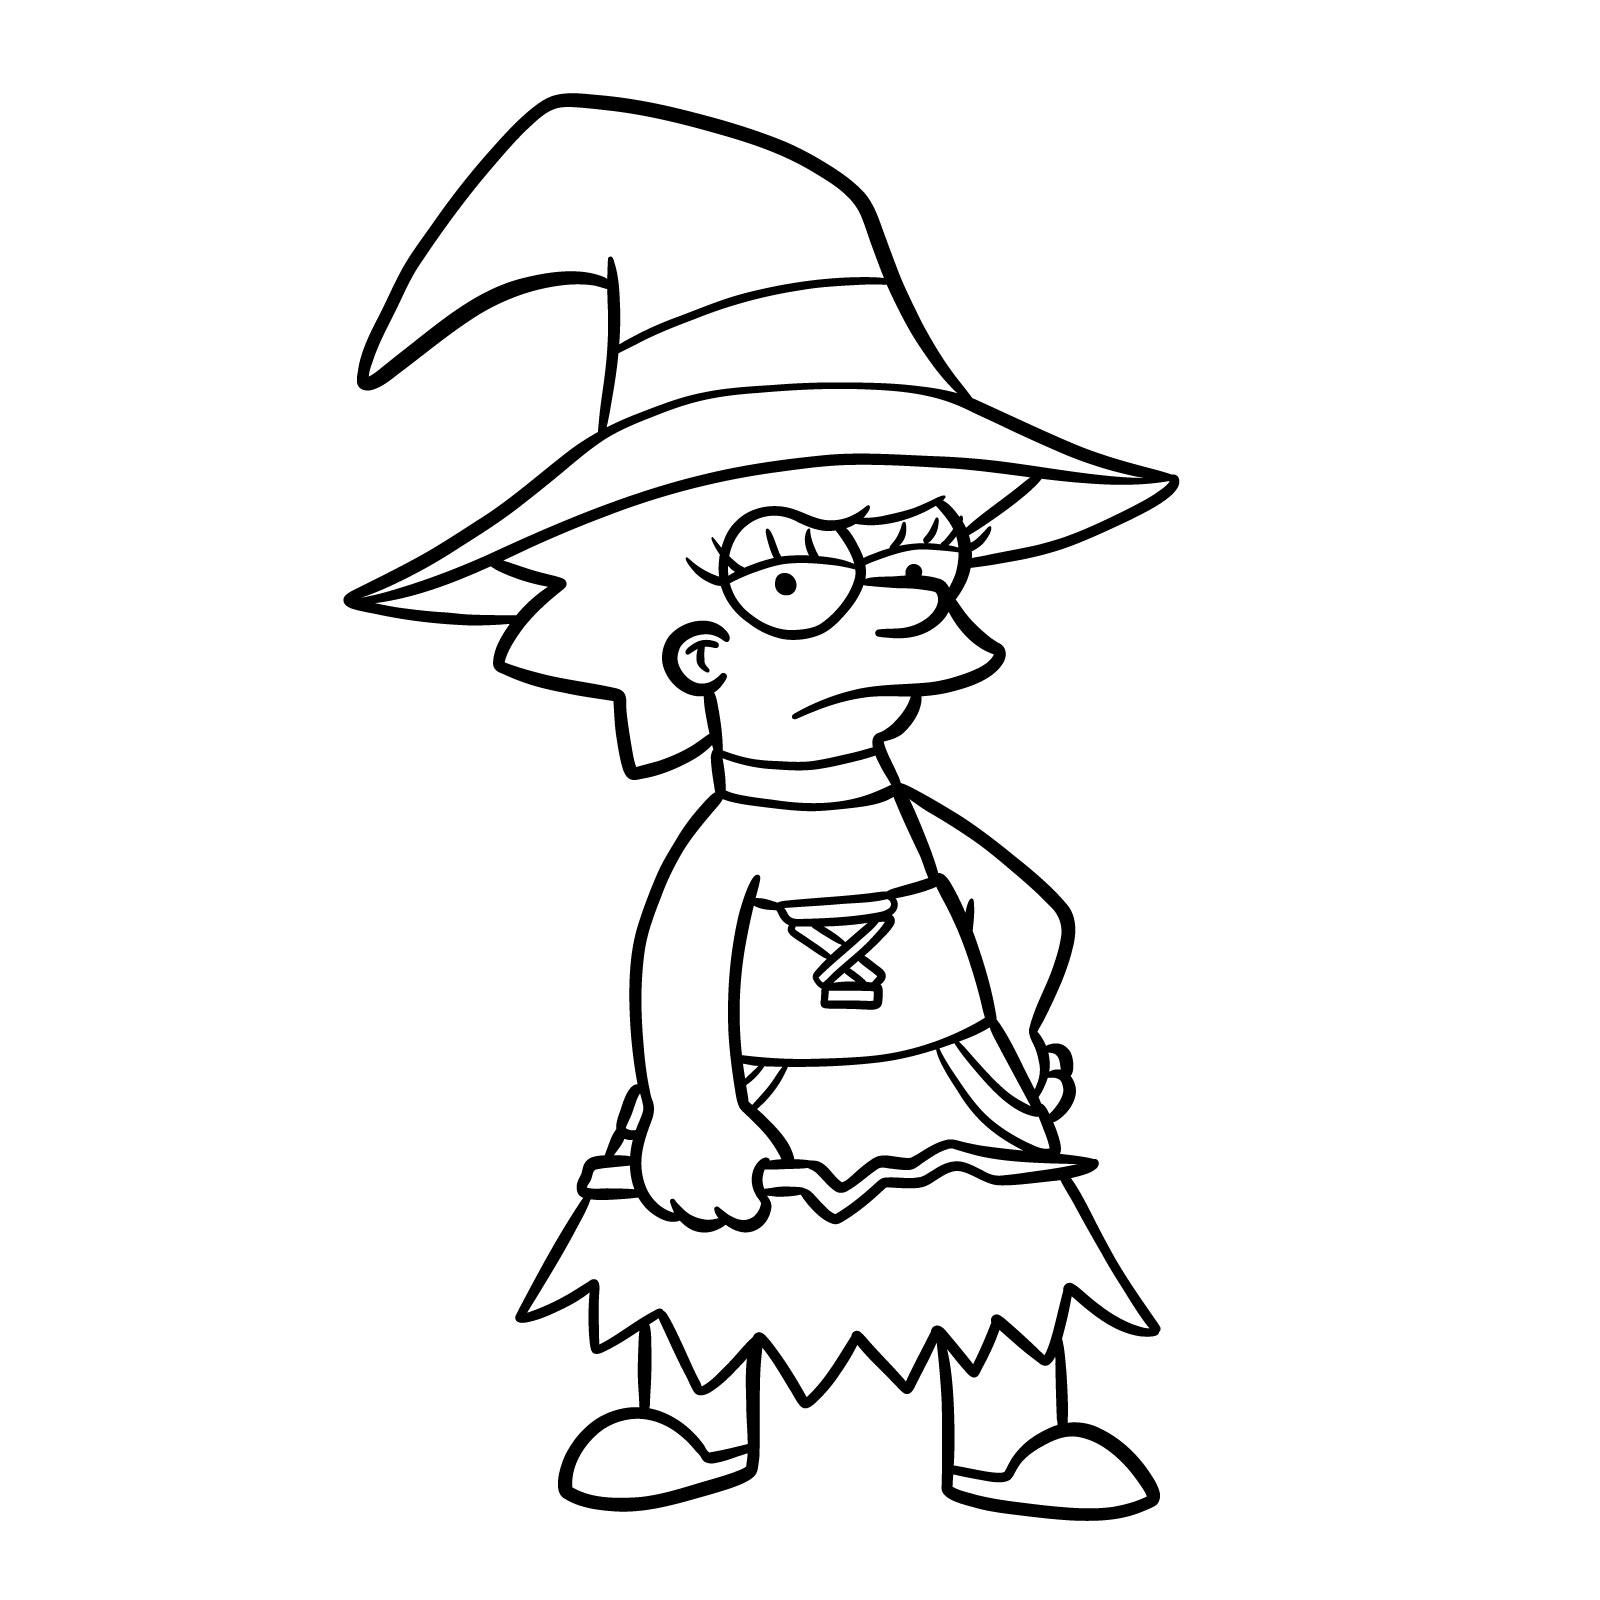 How to draw Lisa as a witch - final step